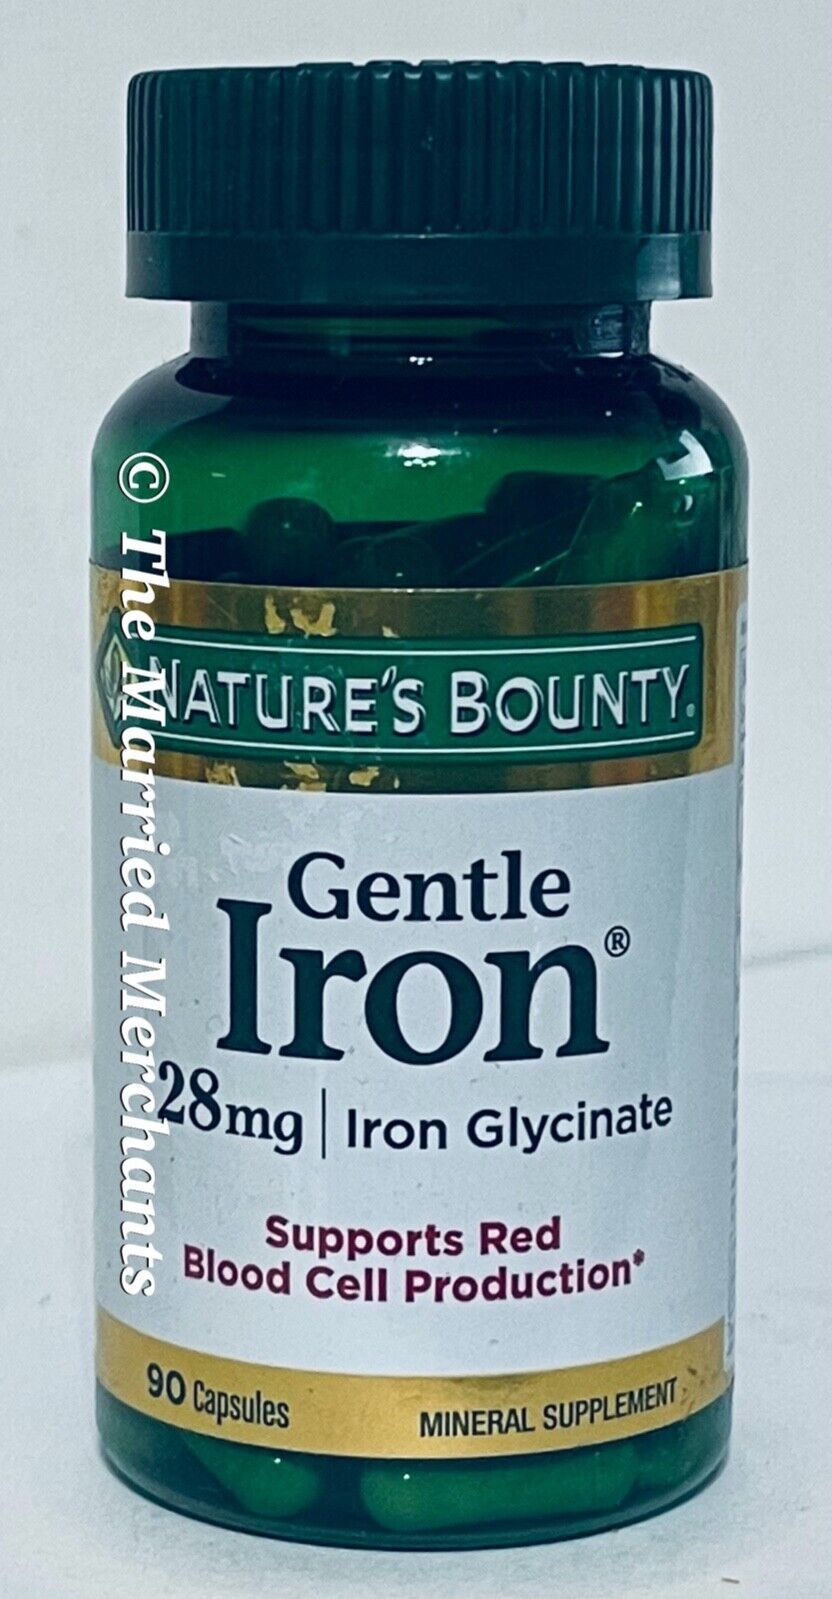 Primary image for Nature's Bounty Gentle Iron 28 mg Iron Glycinate 90 capsules 2/2026 FRESH!